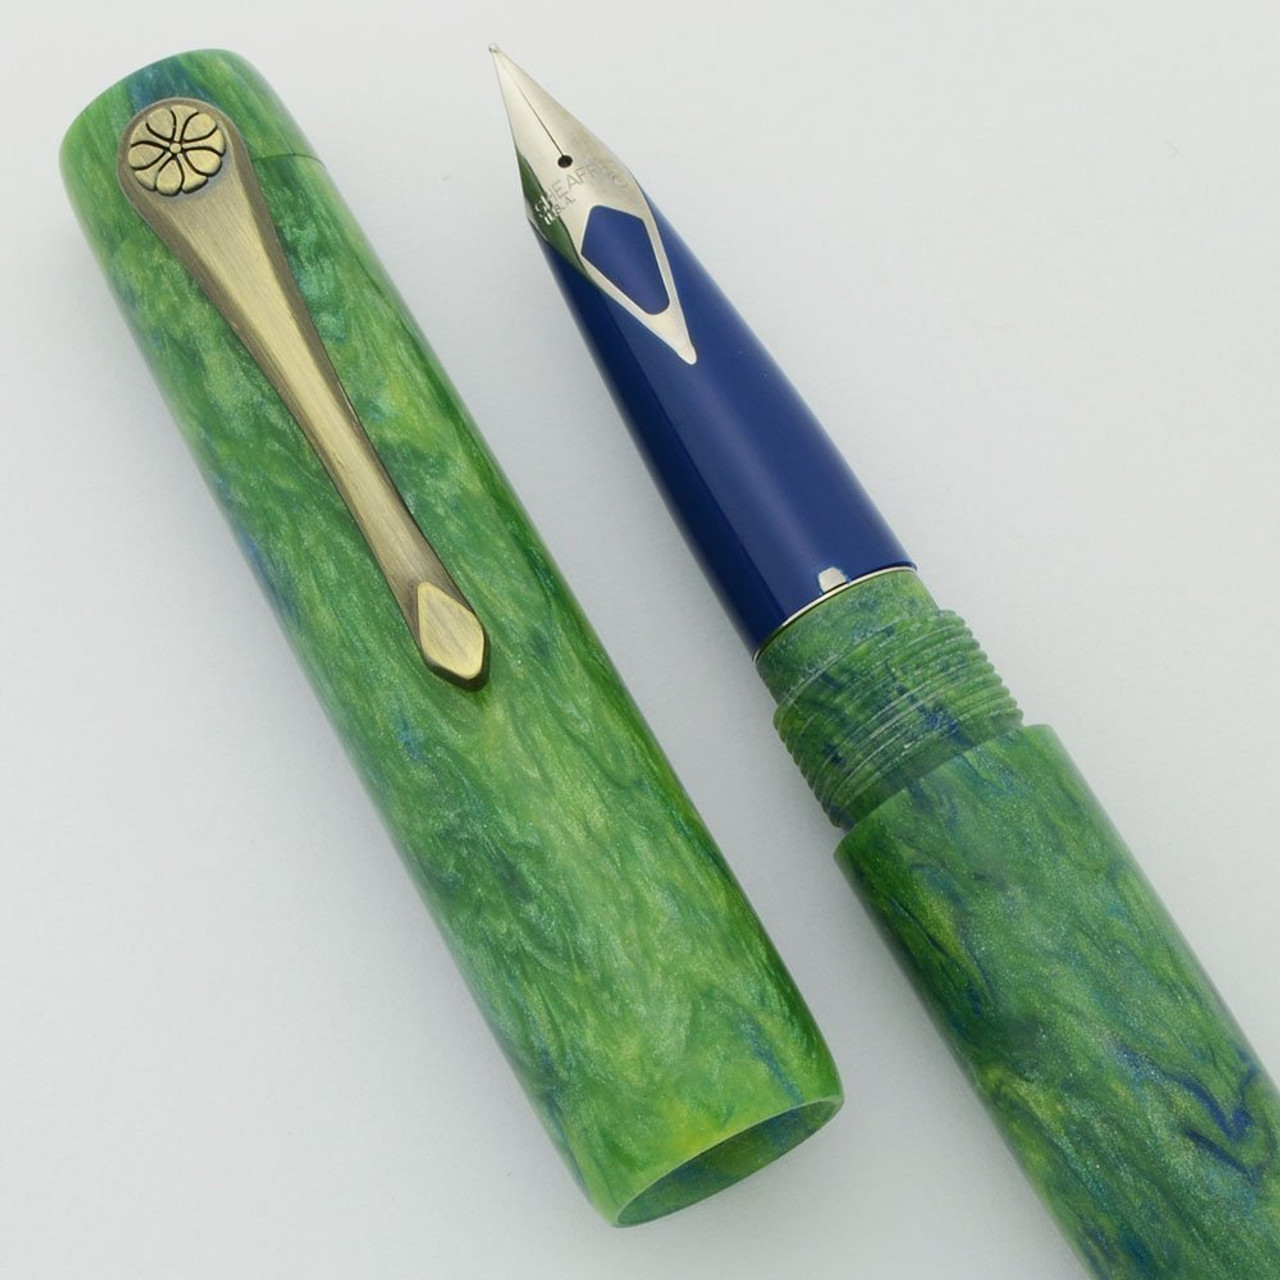 PSPW Prototype Fountain Pen for Sheaffer Imperial Nibs - "Parakeet"  Alumilite, Brass-Colored Clip (New)